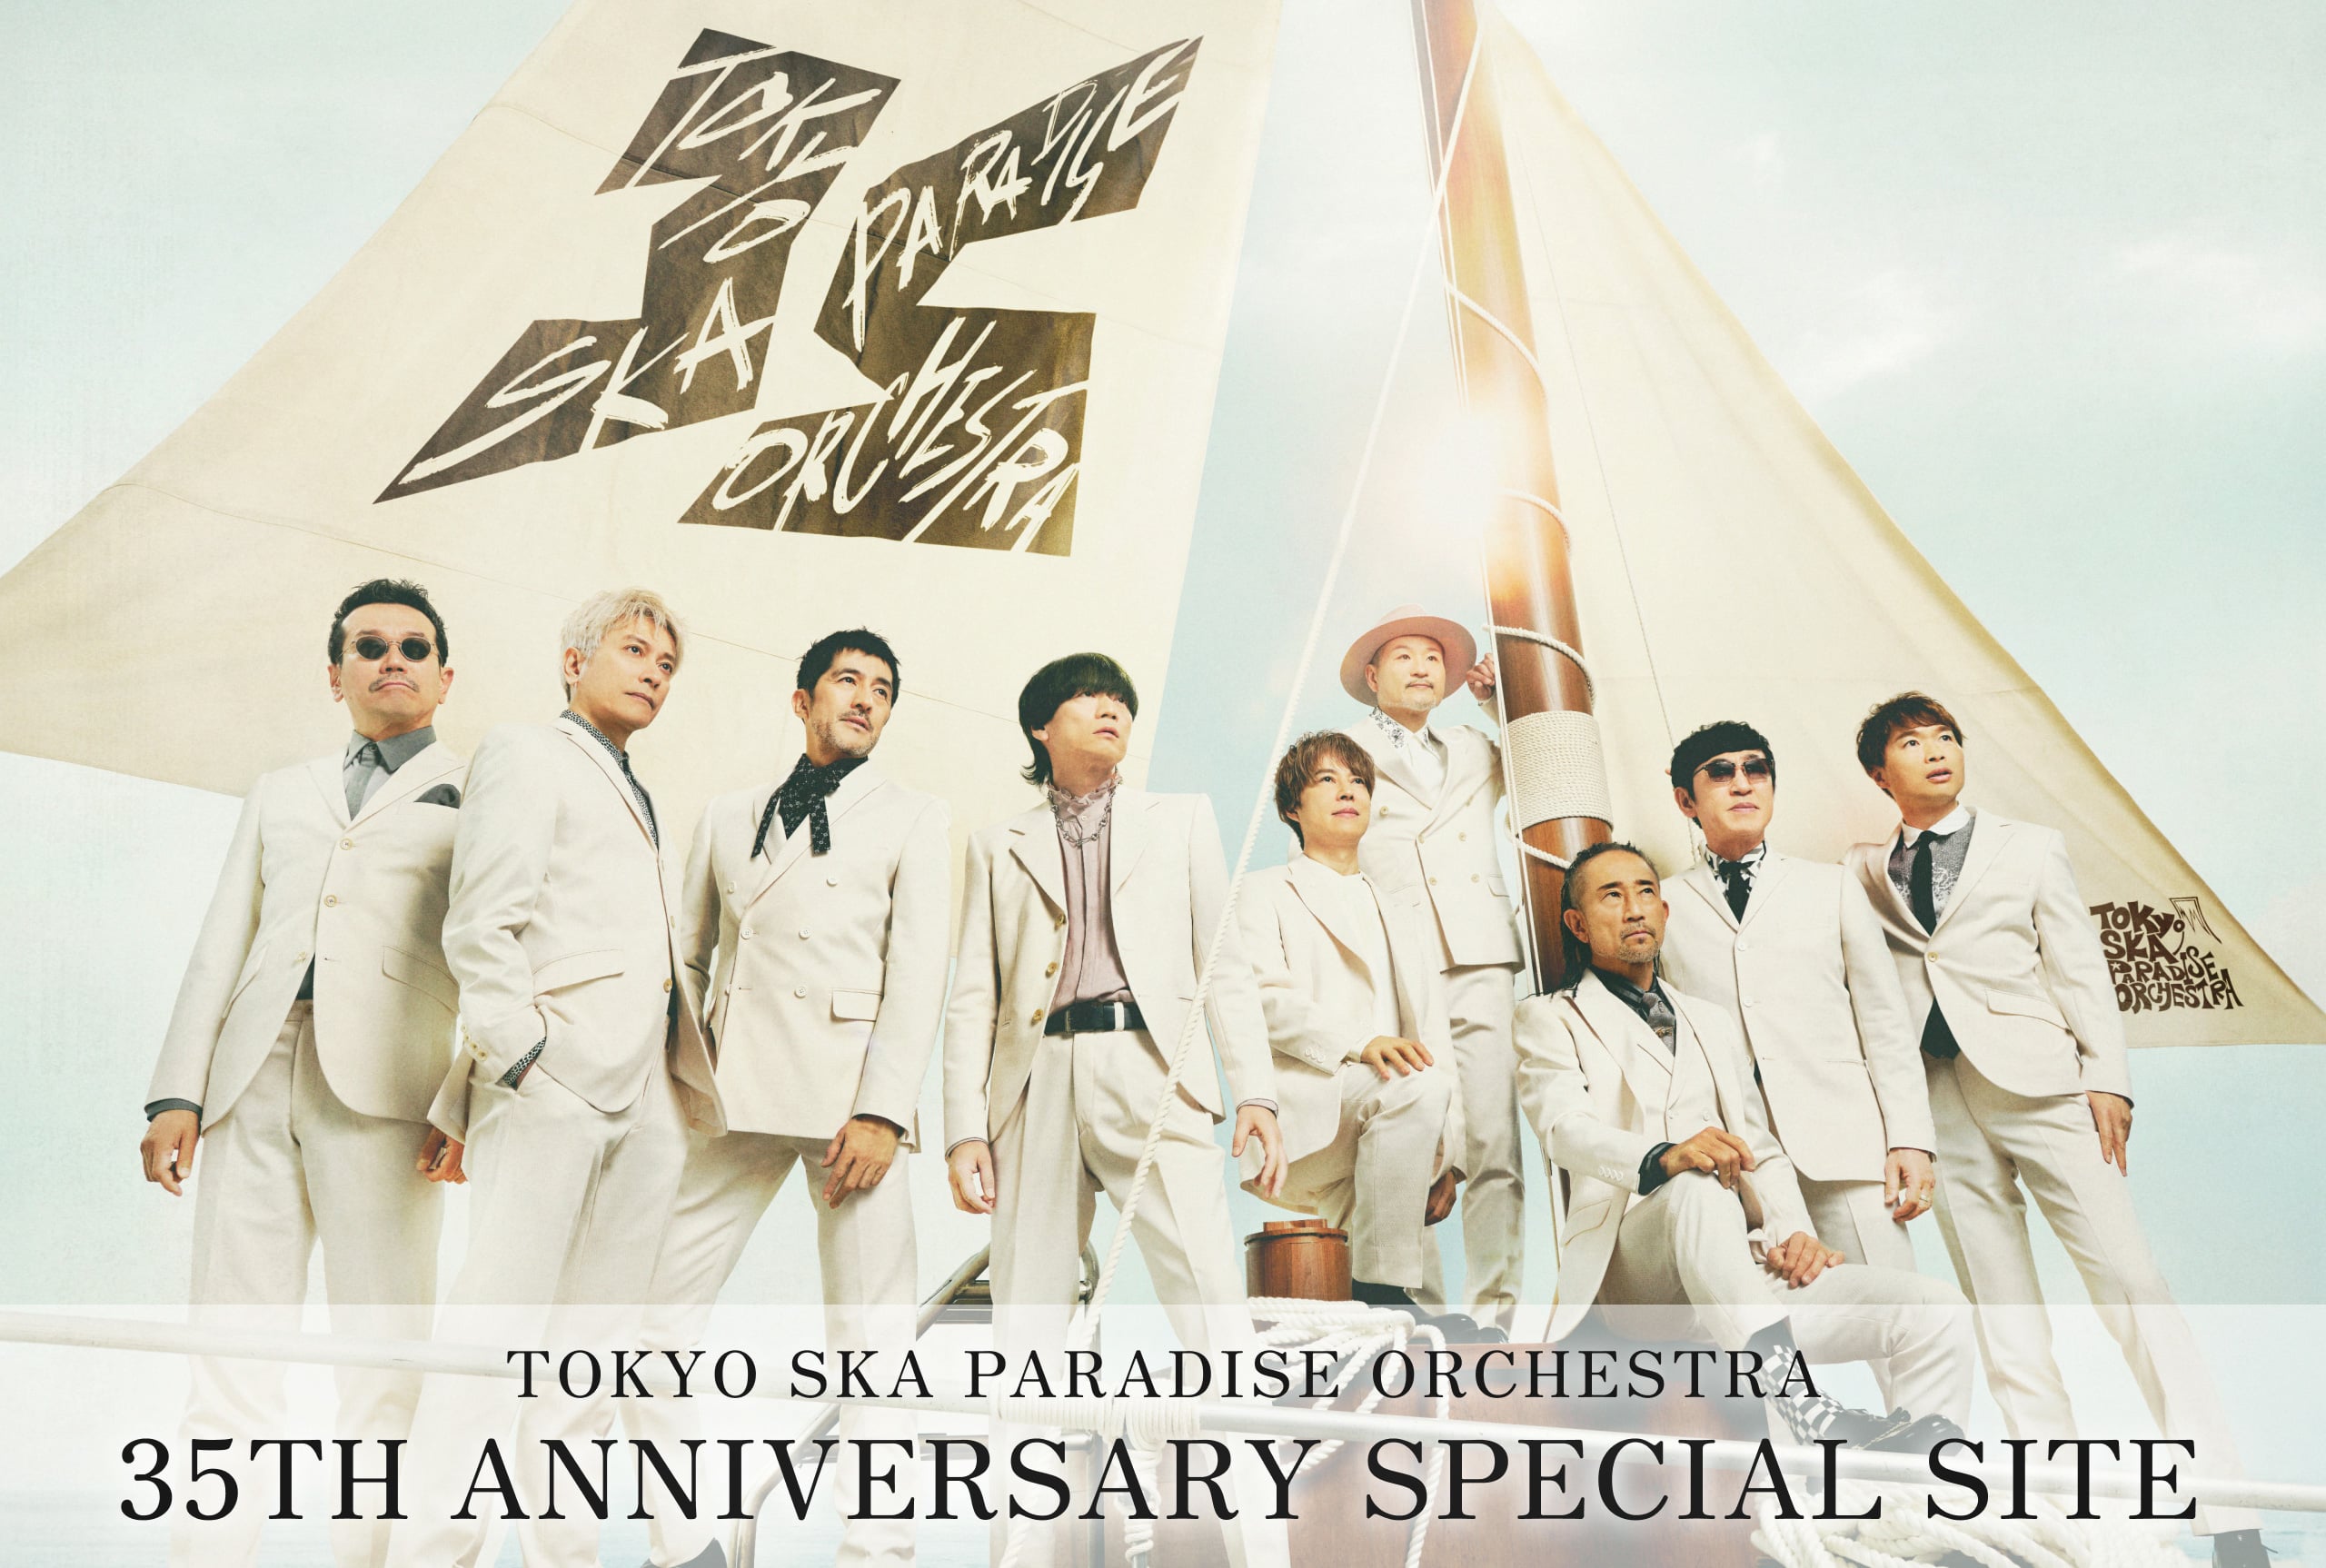 TOKYO SKA PARADISE ORCHESTRA 35TH ANNIVERSARY SPECIAL SITE